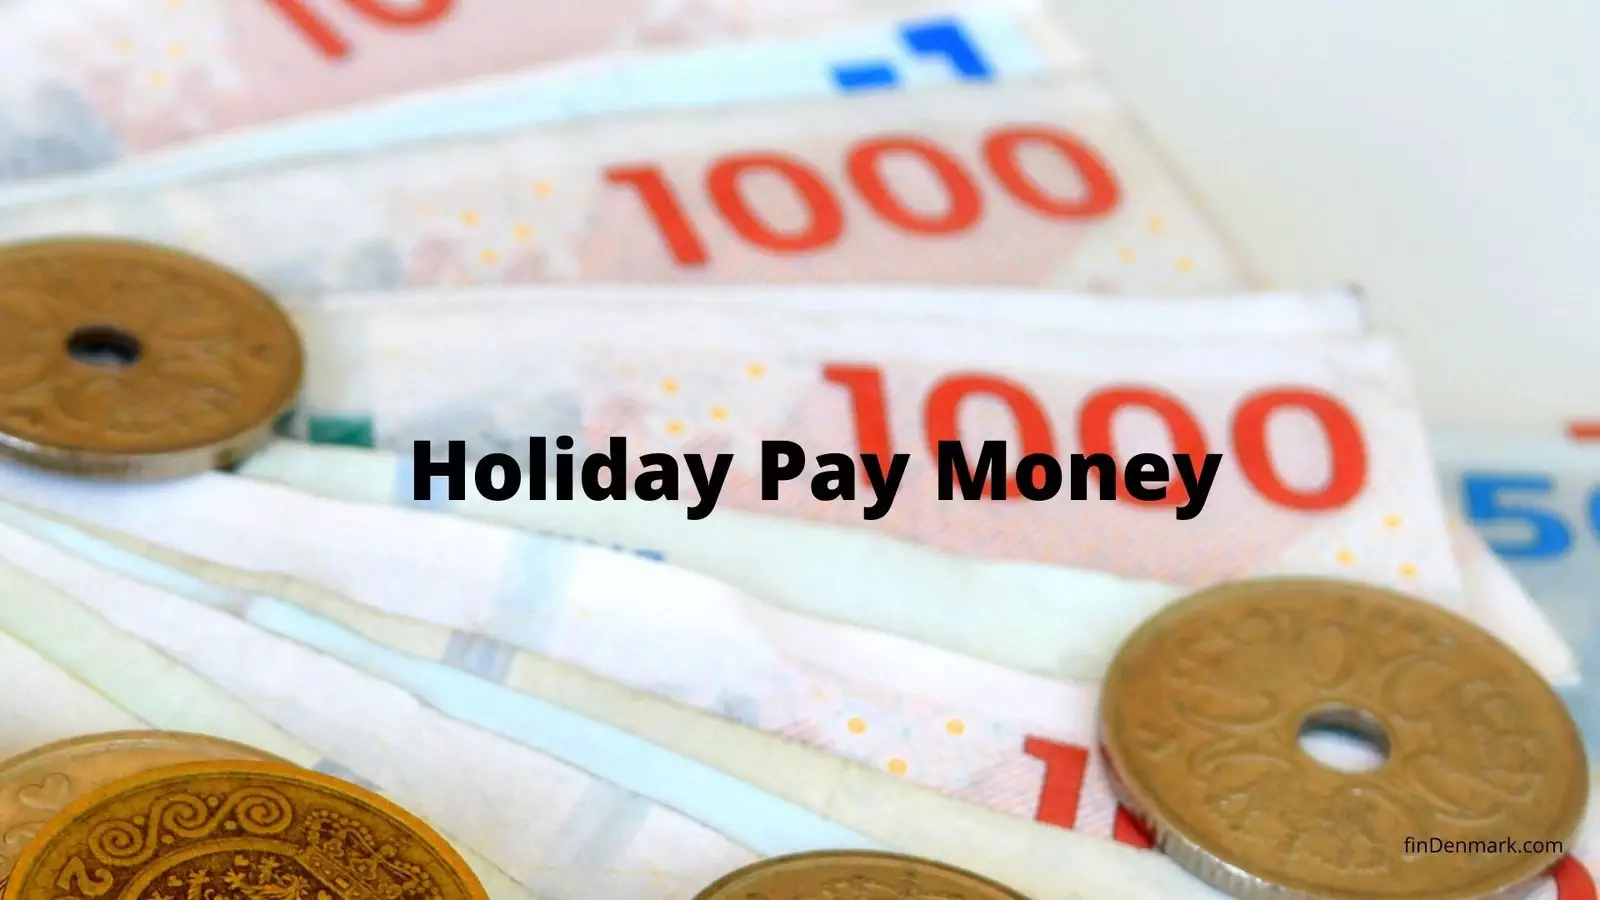 NOW YOU CAN GET LAST TWO WEEKS HOLIDAY MONEY!!!